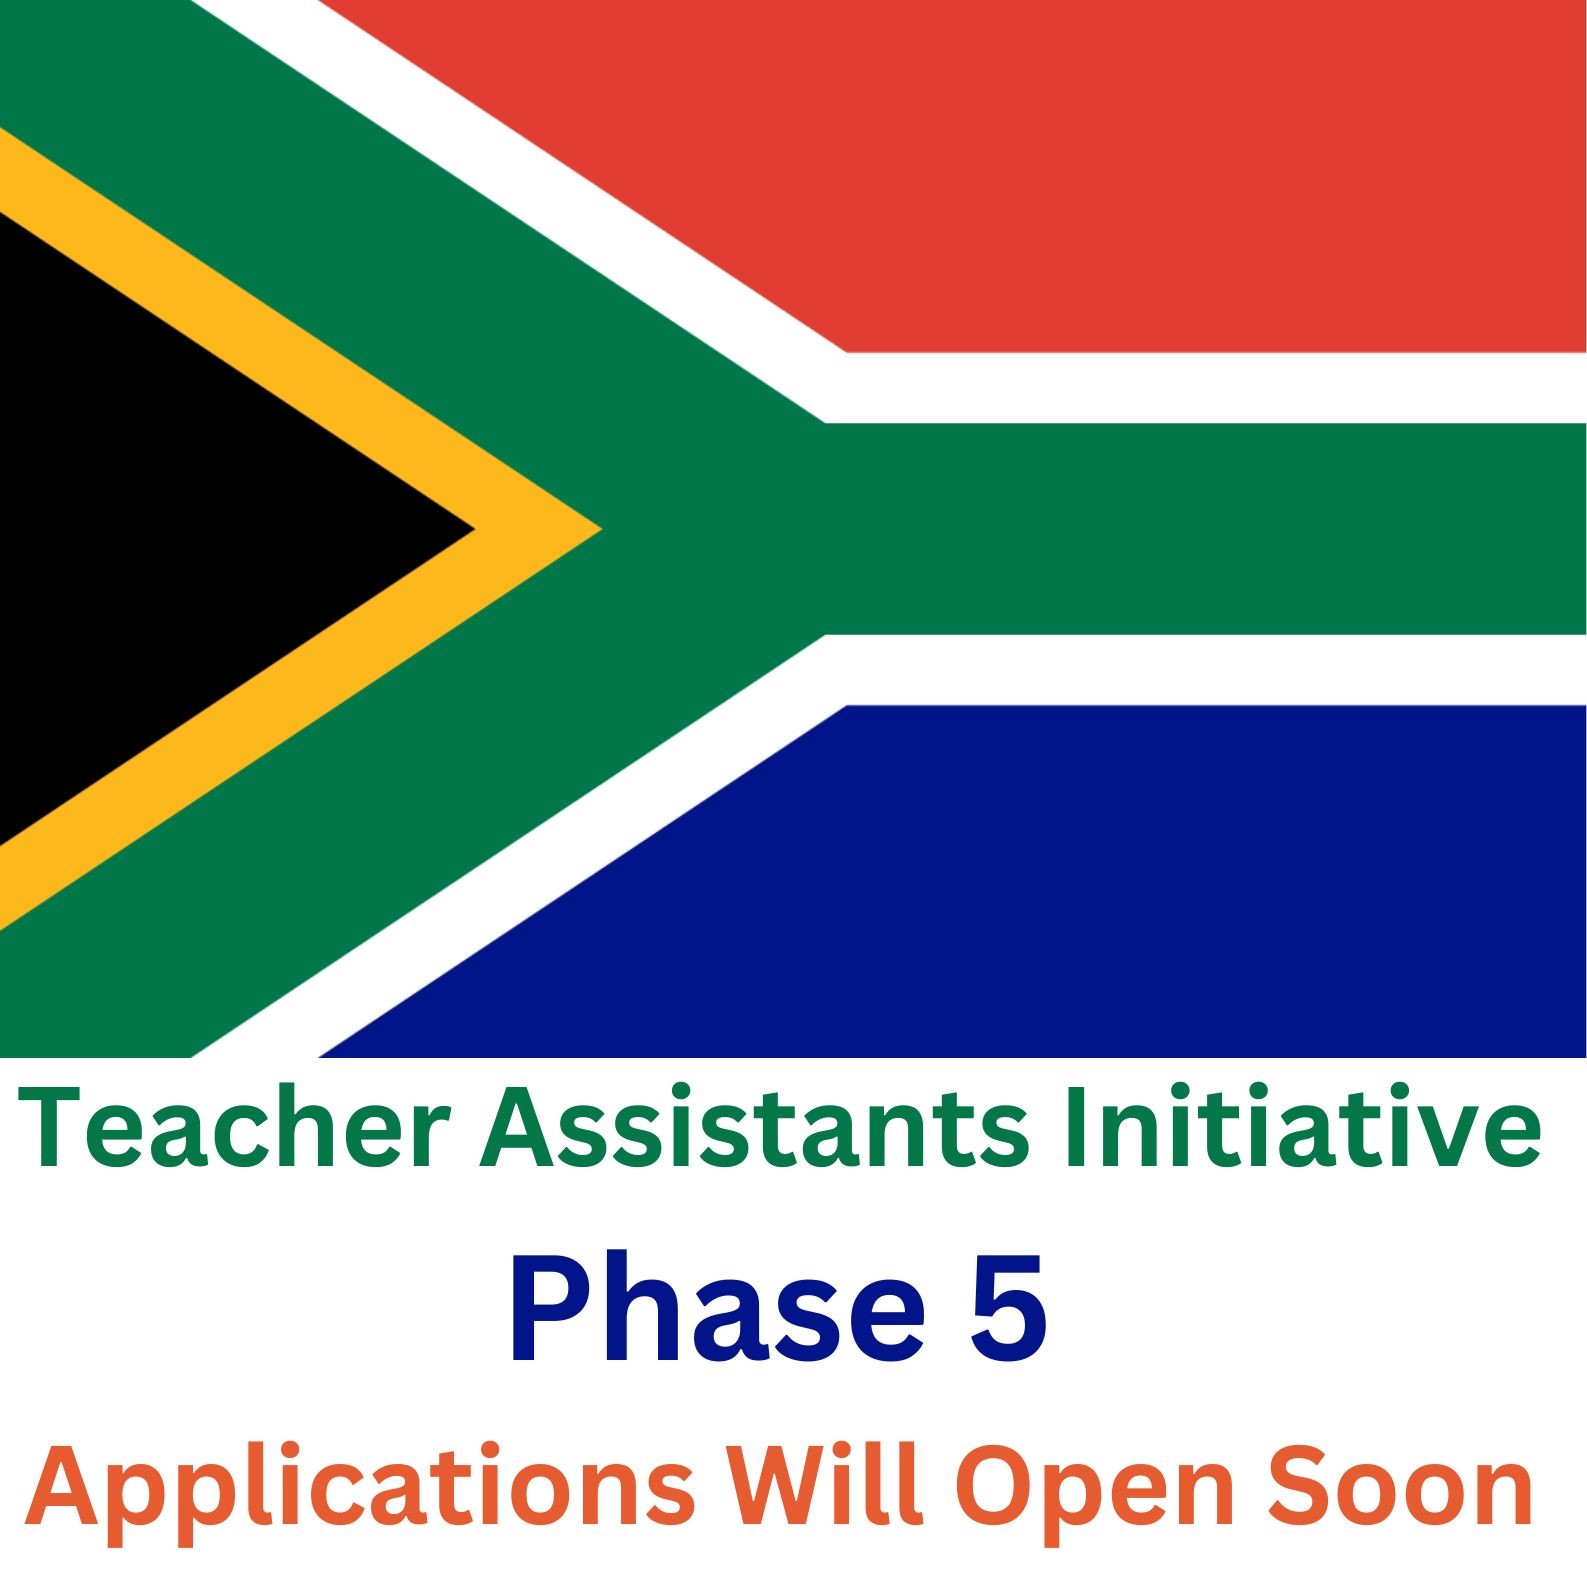 When Teacher Assistants Initiative Phase 5 Applications Will Open